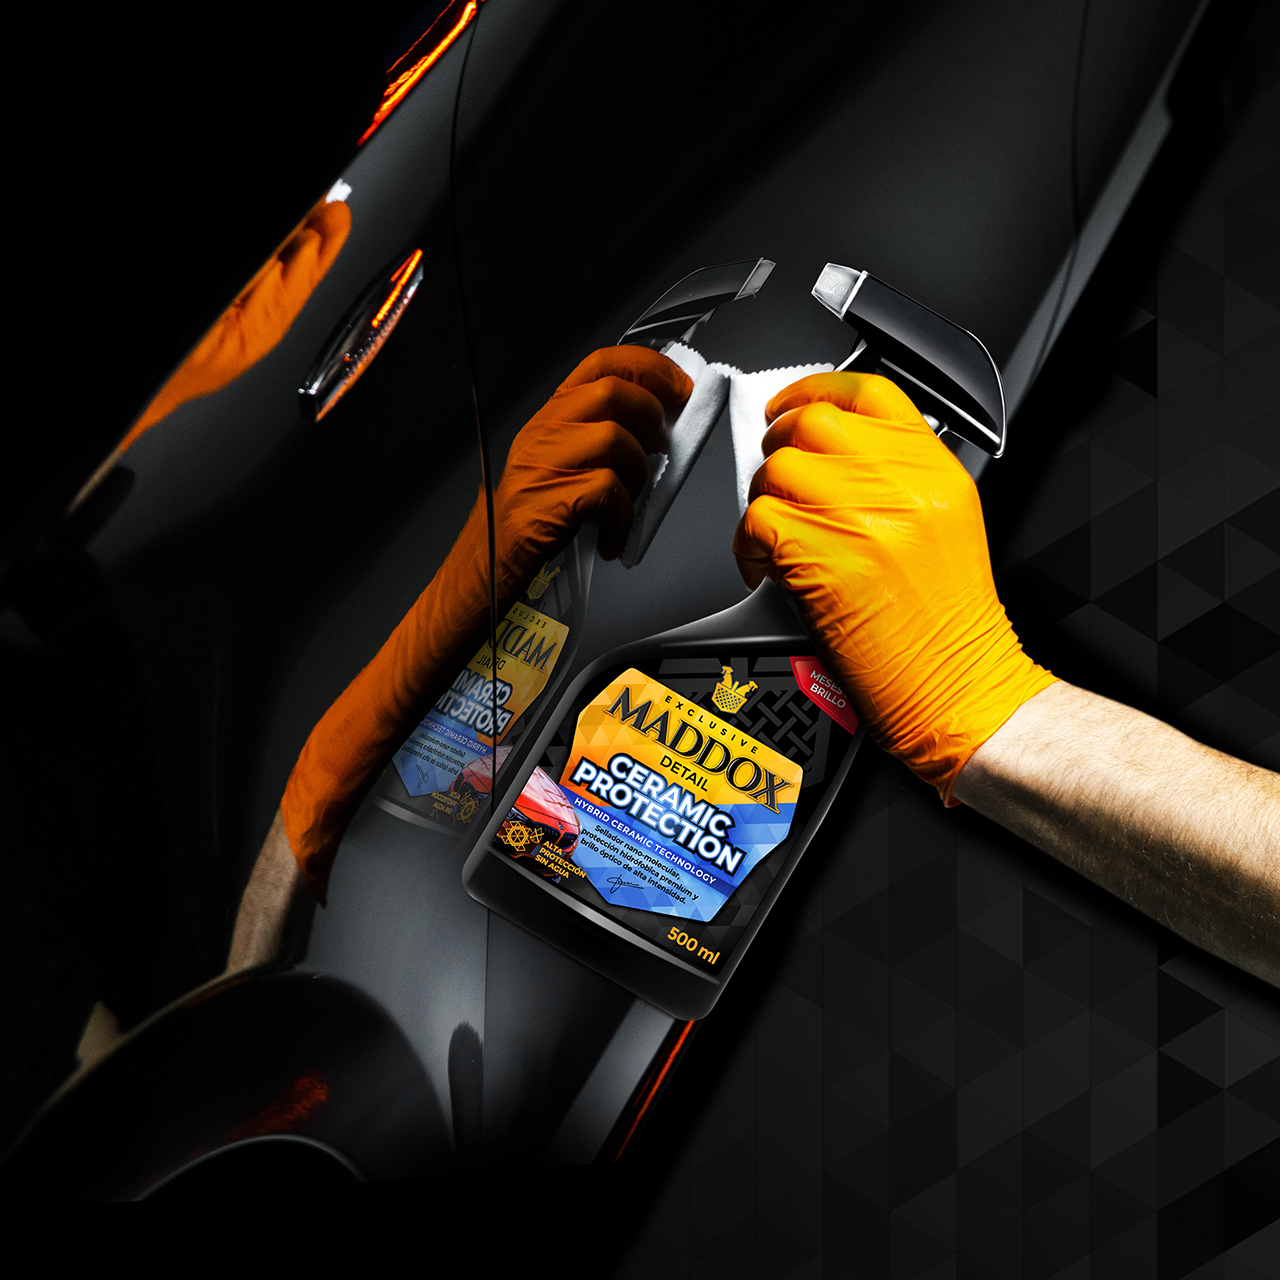 Give Your Automobile Long-lasting Protection with Maddox Detail's Ceramic  Treatment Product Range